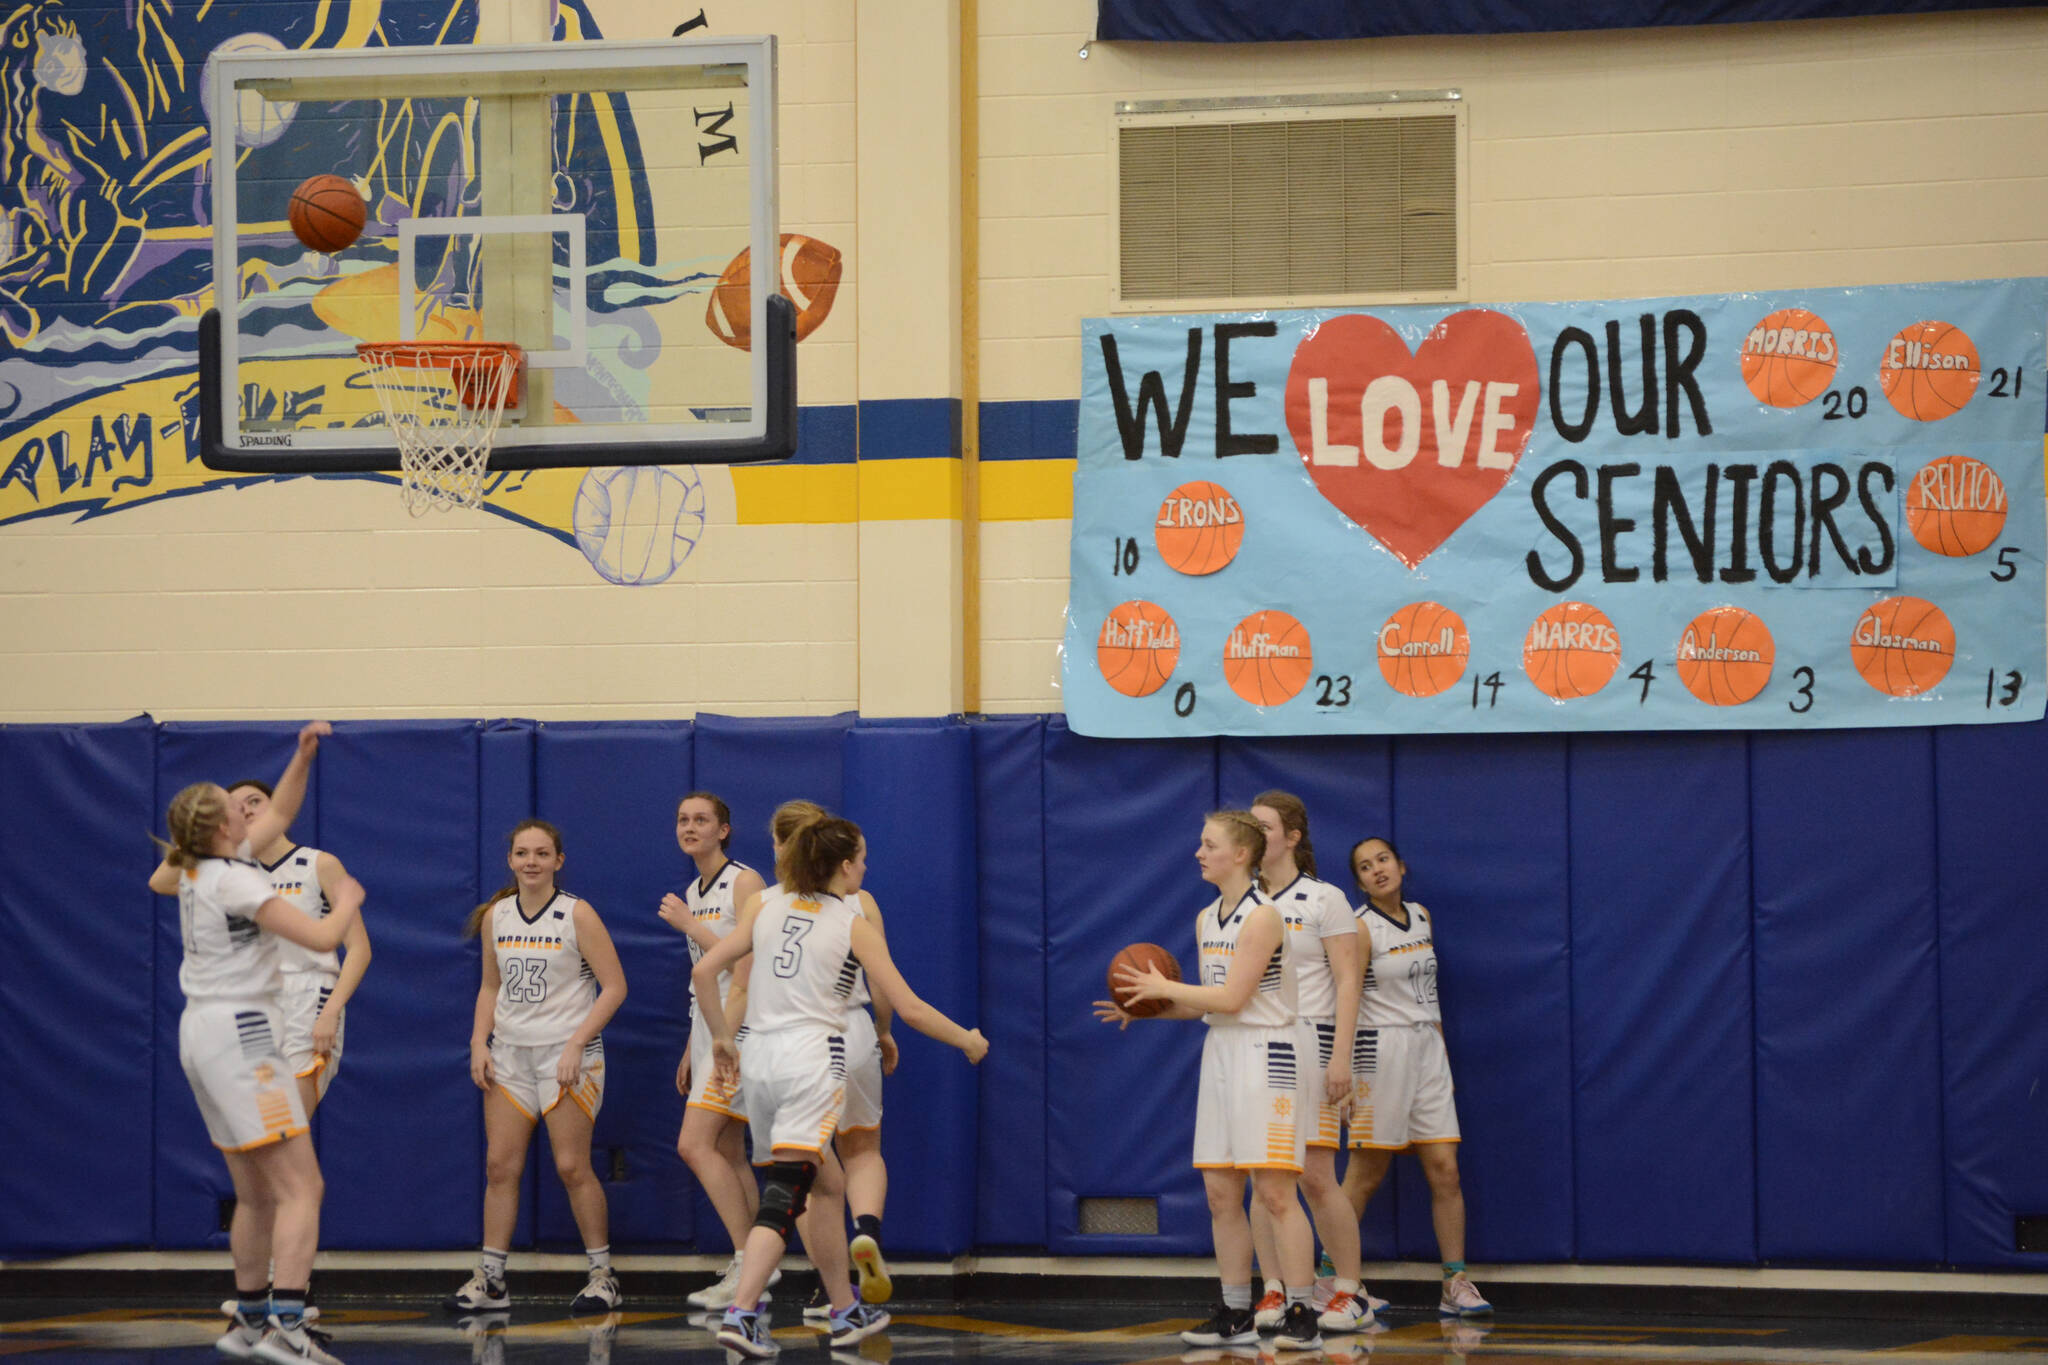 The Lady Mariners warm up in a game against the Nikiski Bulldogs during Senior Night on Friday, Feb. 25, 2022, at the Alice Witte Gym at Homer High School in Homer, Alaska. (Photo by Michael Armstrong/Homer News)